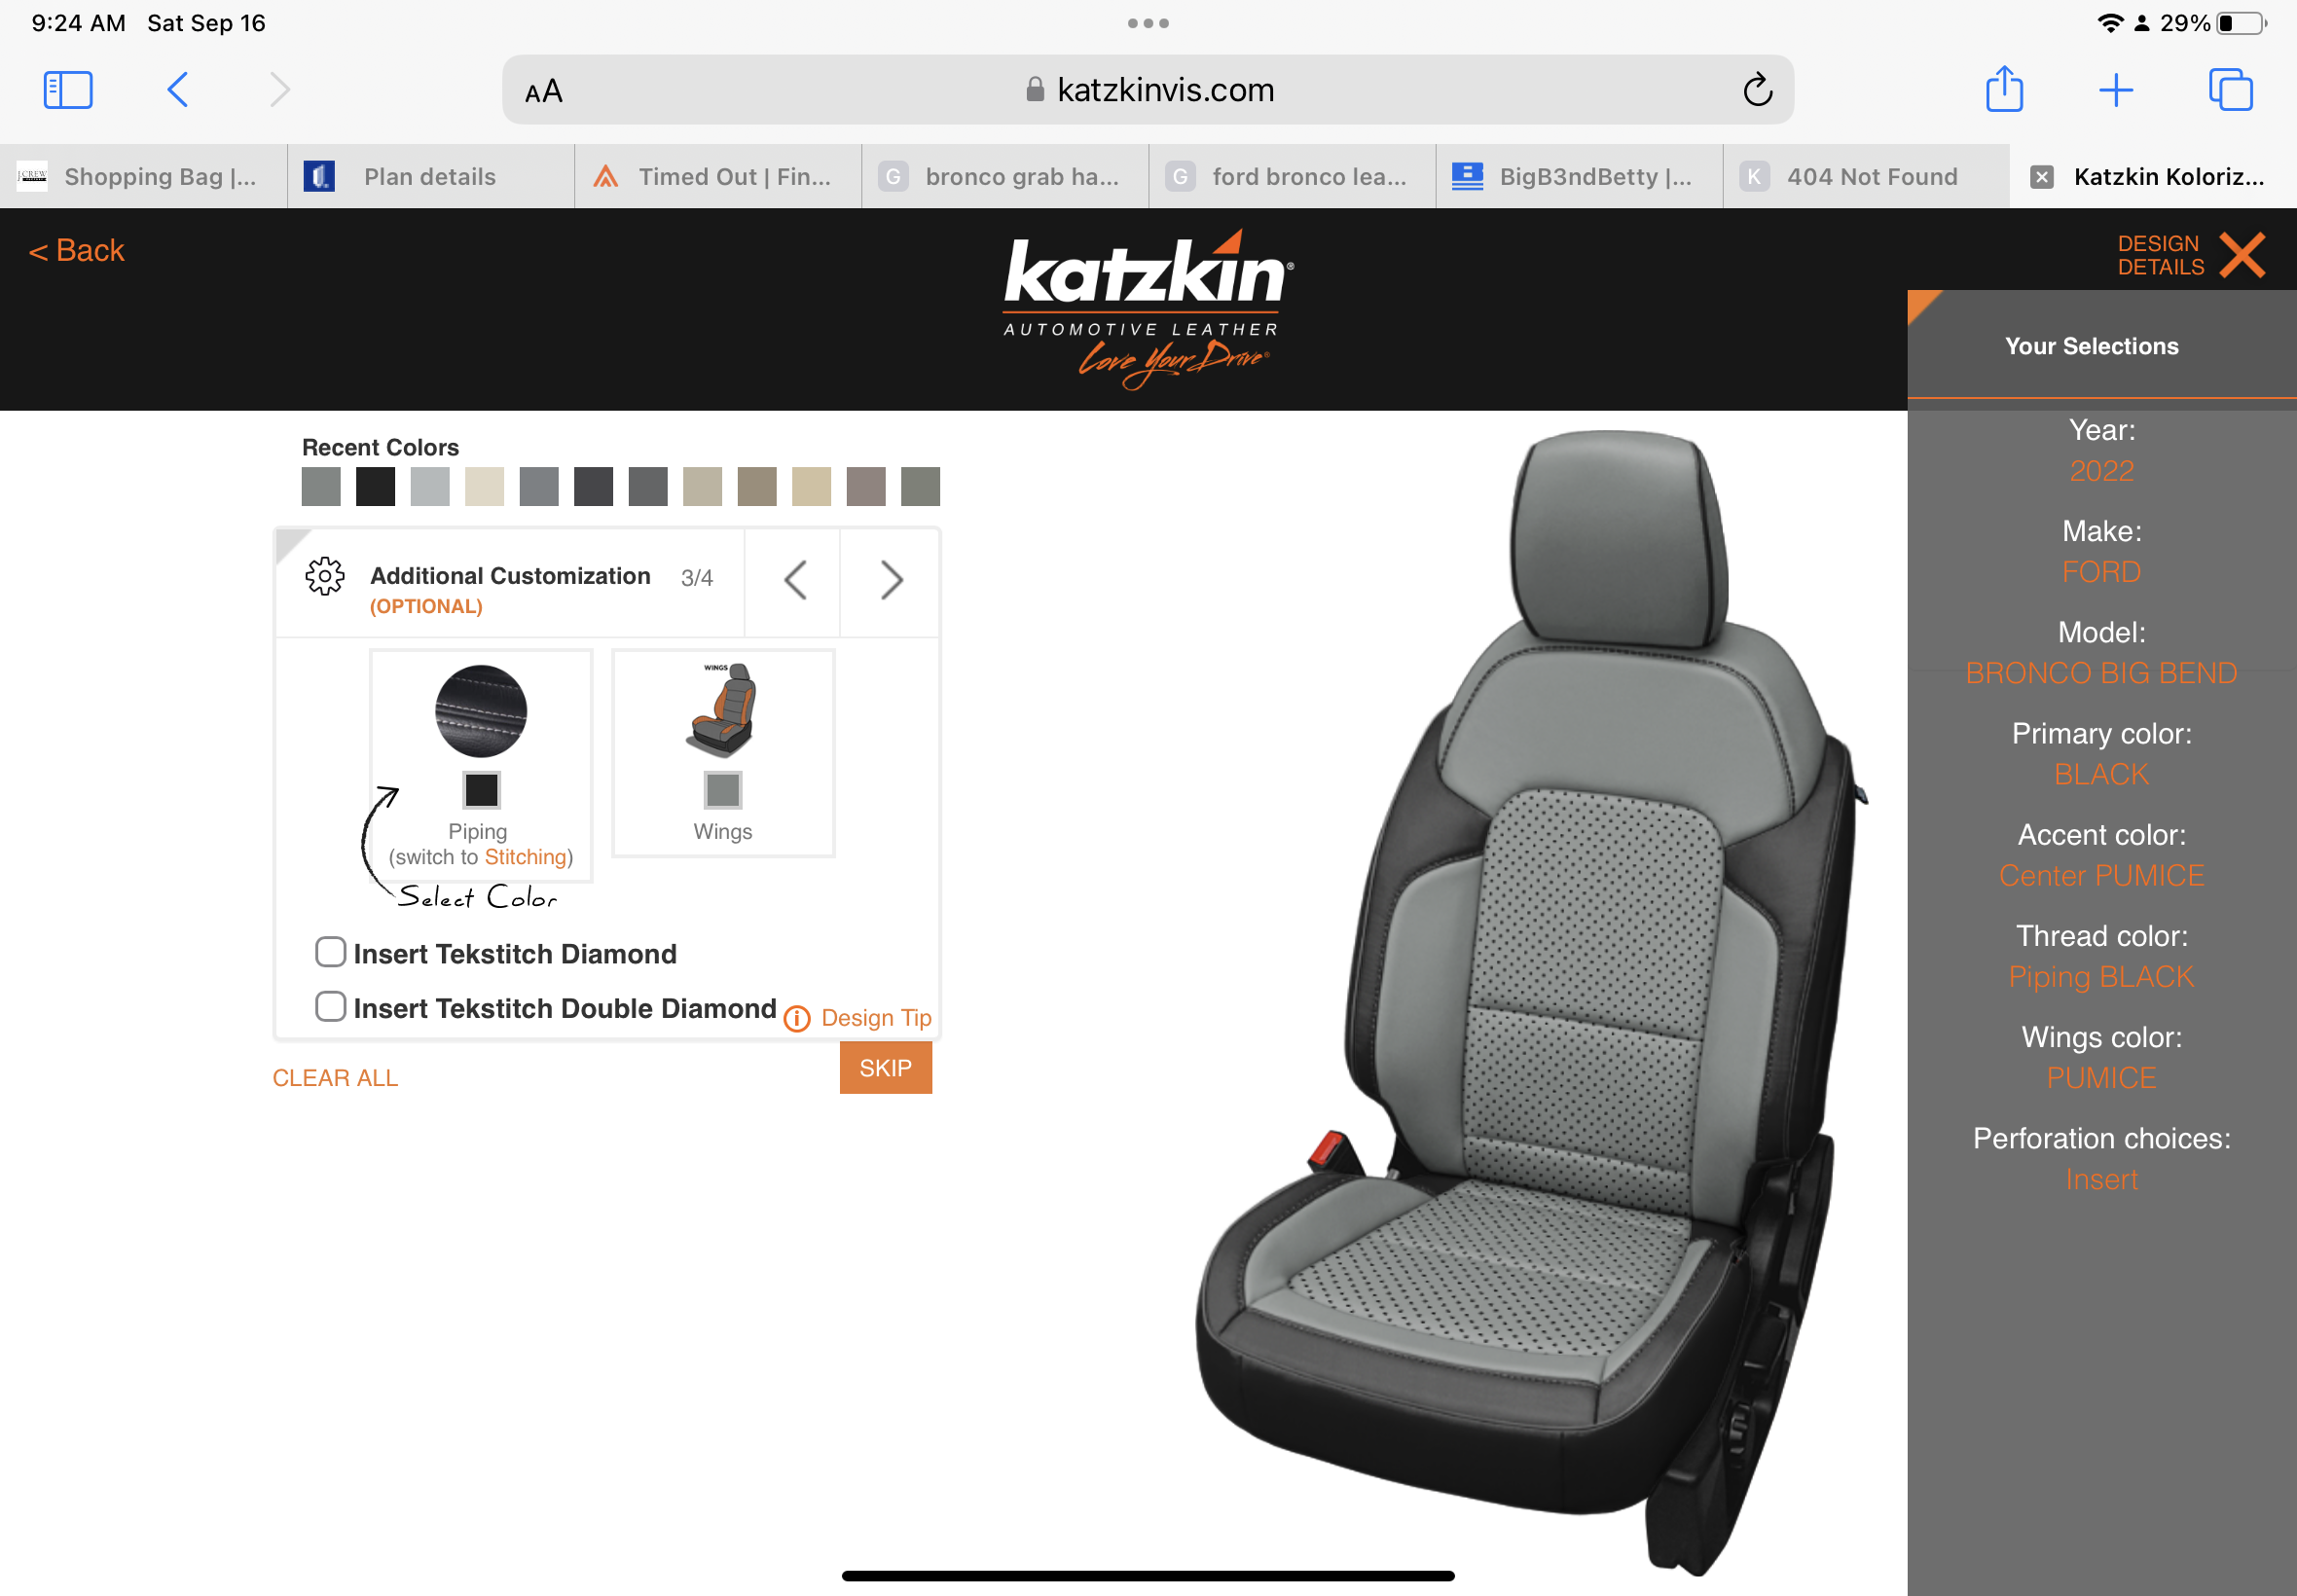 Ford Bronco Trying to pick Katzkin Seat Colors/Design IMG_1446